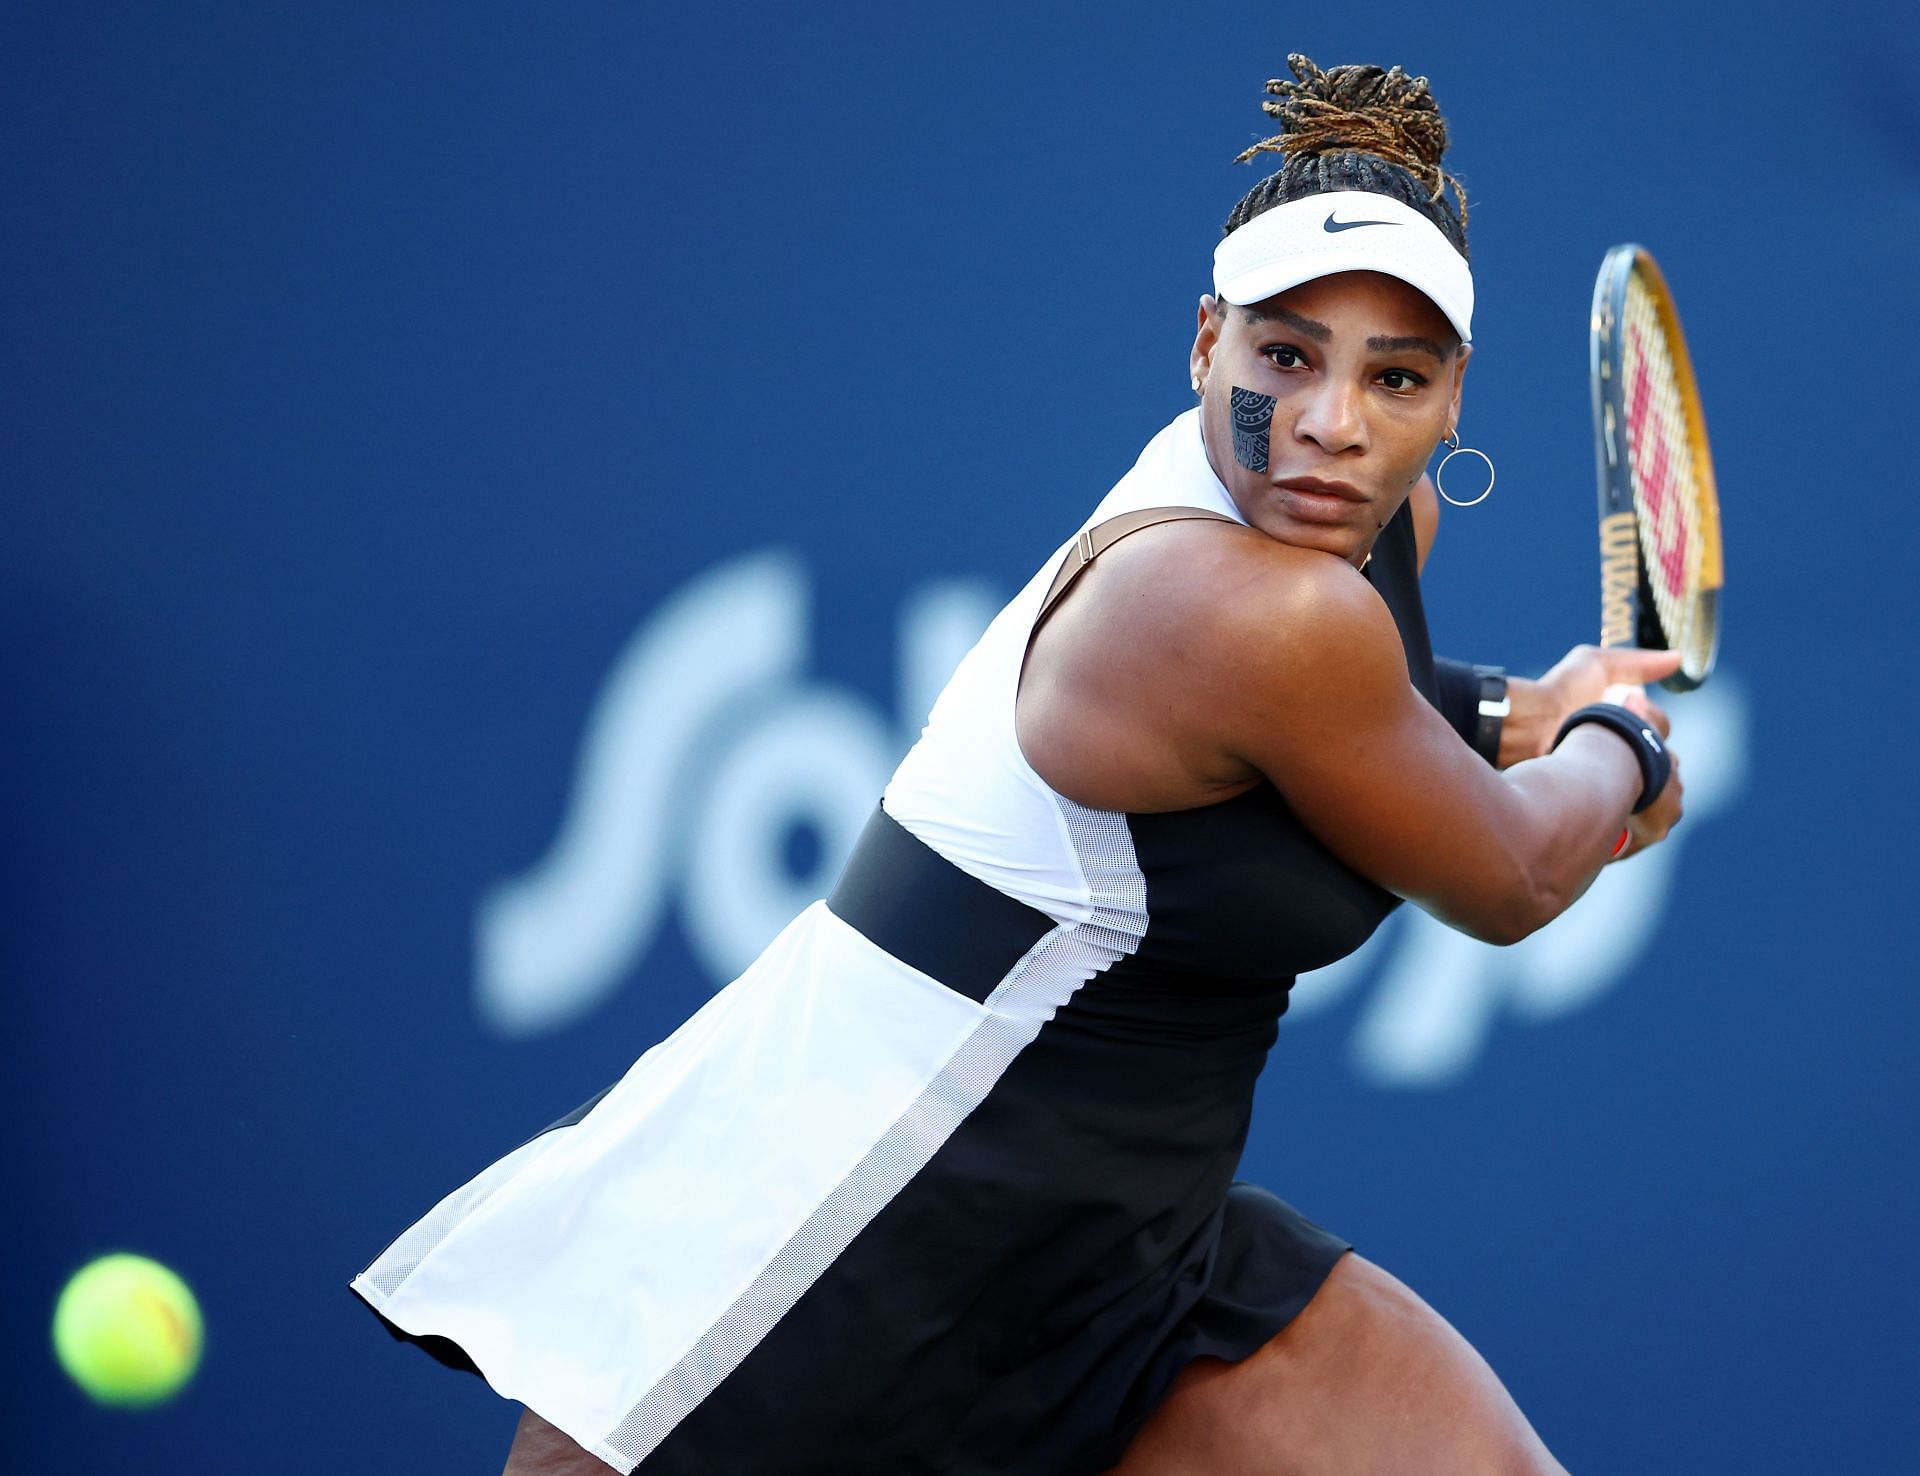 Williams during her match in Montreal.